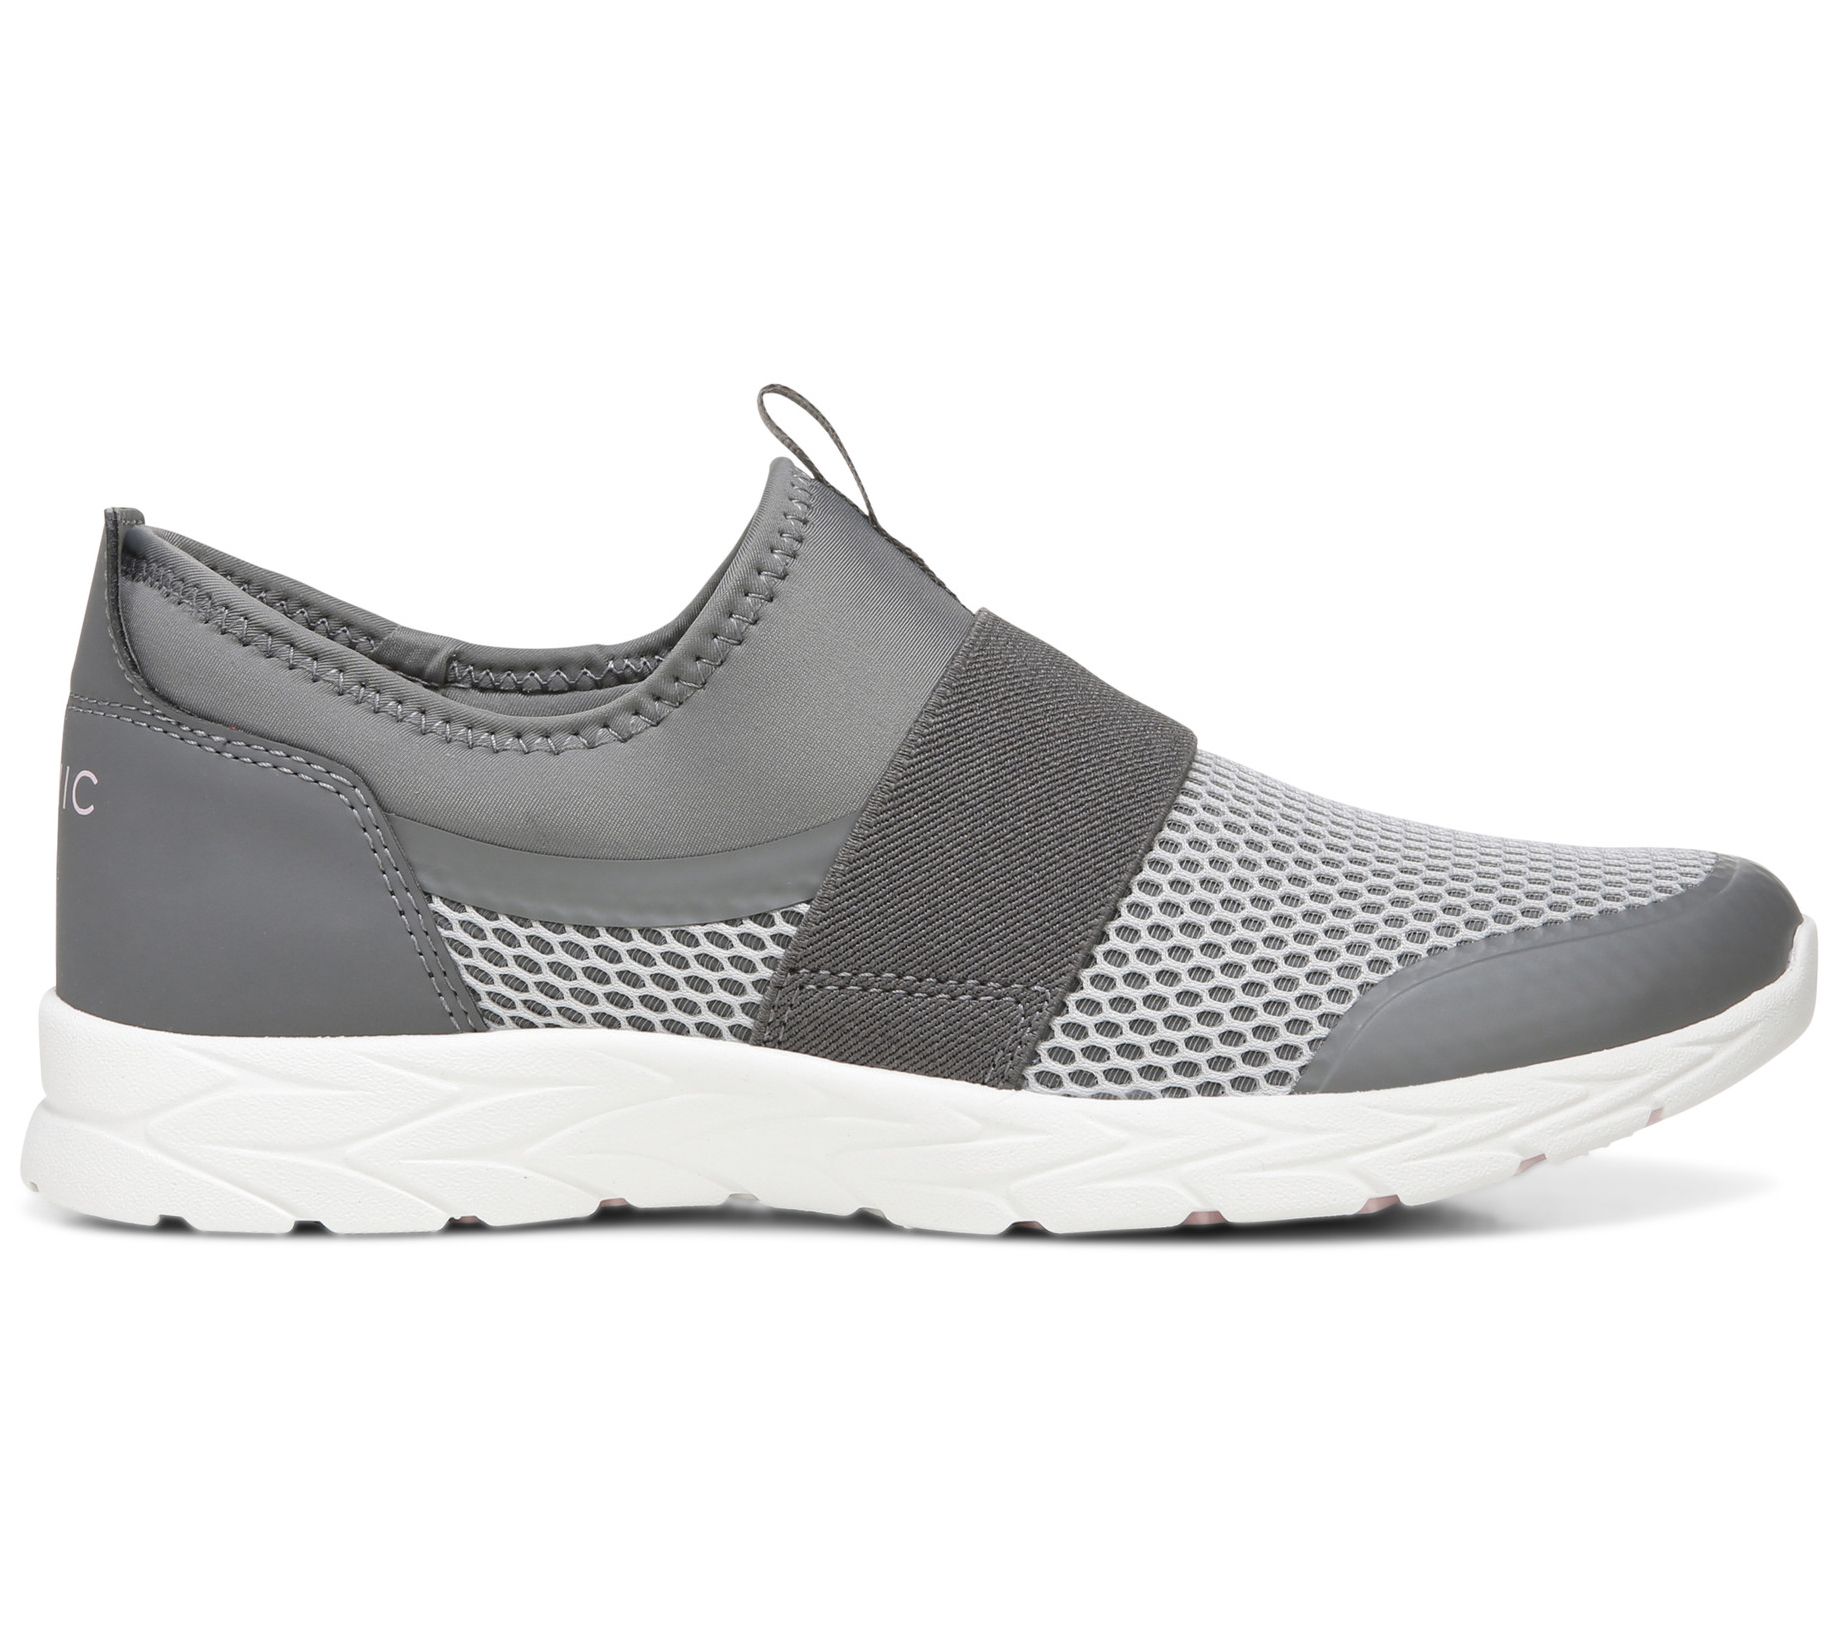 Vionic Slip-On Mesh Athletic Sneakers -Camrie - QVC.com